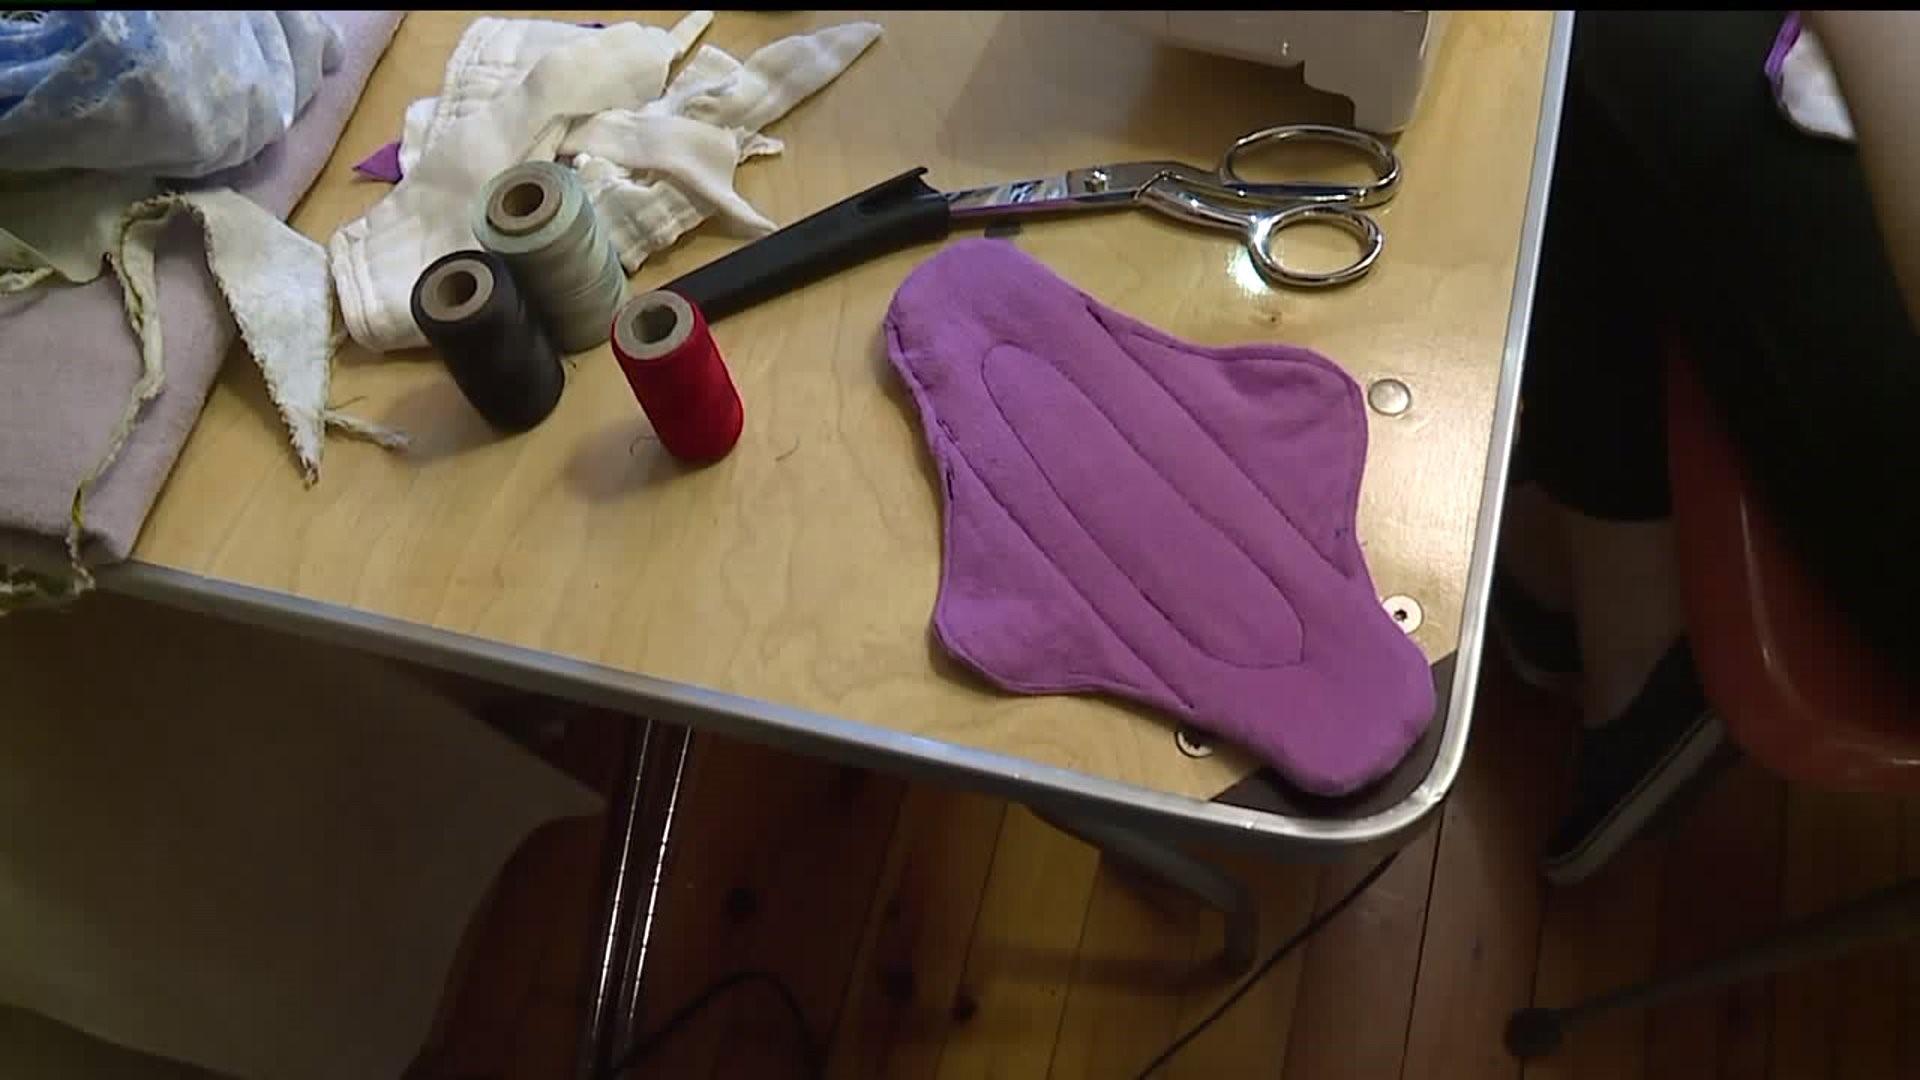 Volunteers make reusable menstral pads to end period poverty